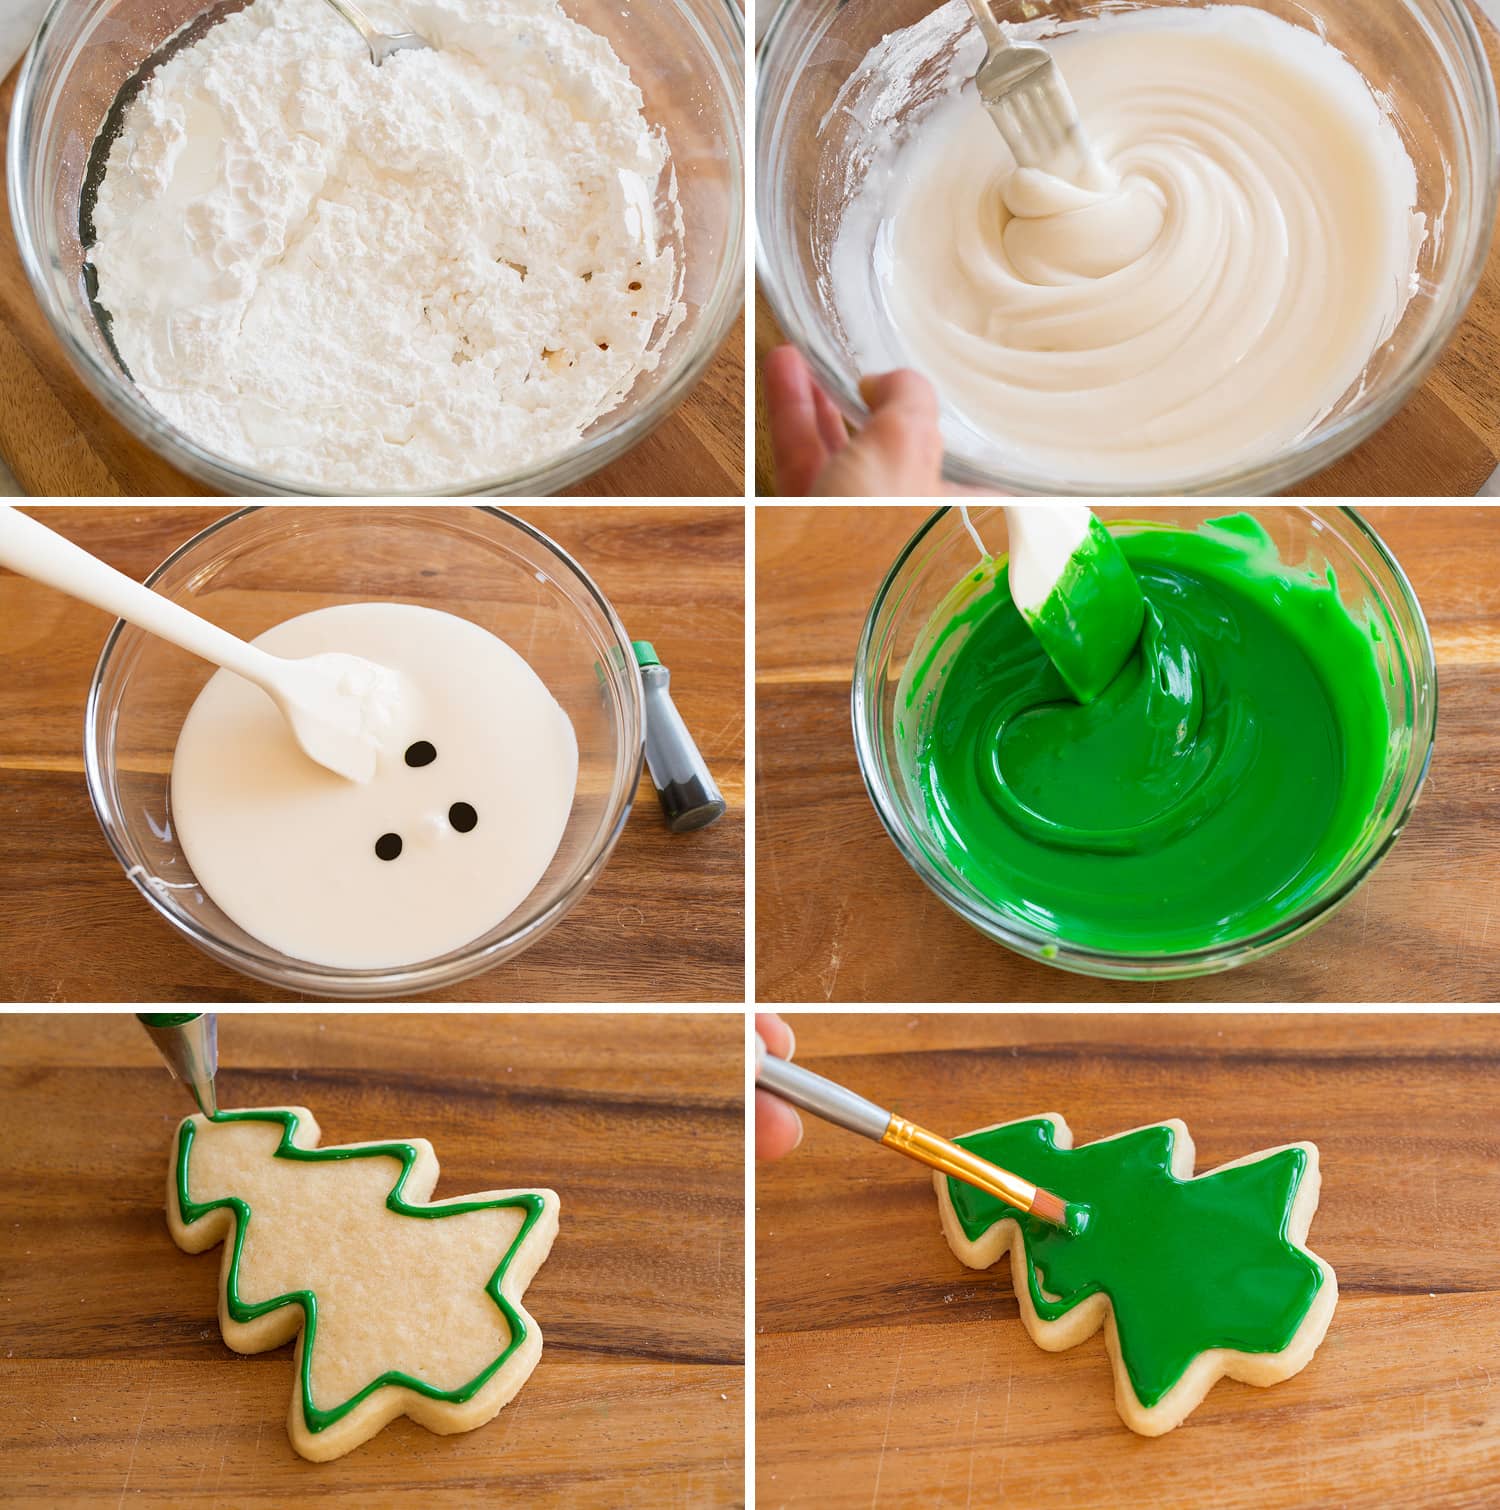 Collage of six photos showing how to make sugar cookie icing with powdered sugar, milk, corn syrup and extracts. Shown mixing in a glass bowl, tinting with food coloring and piping over cookie.